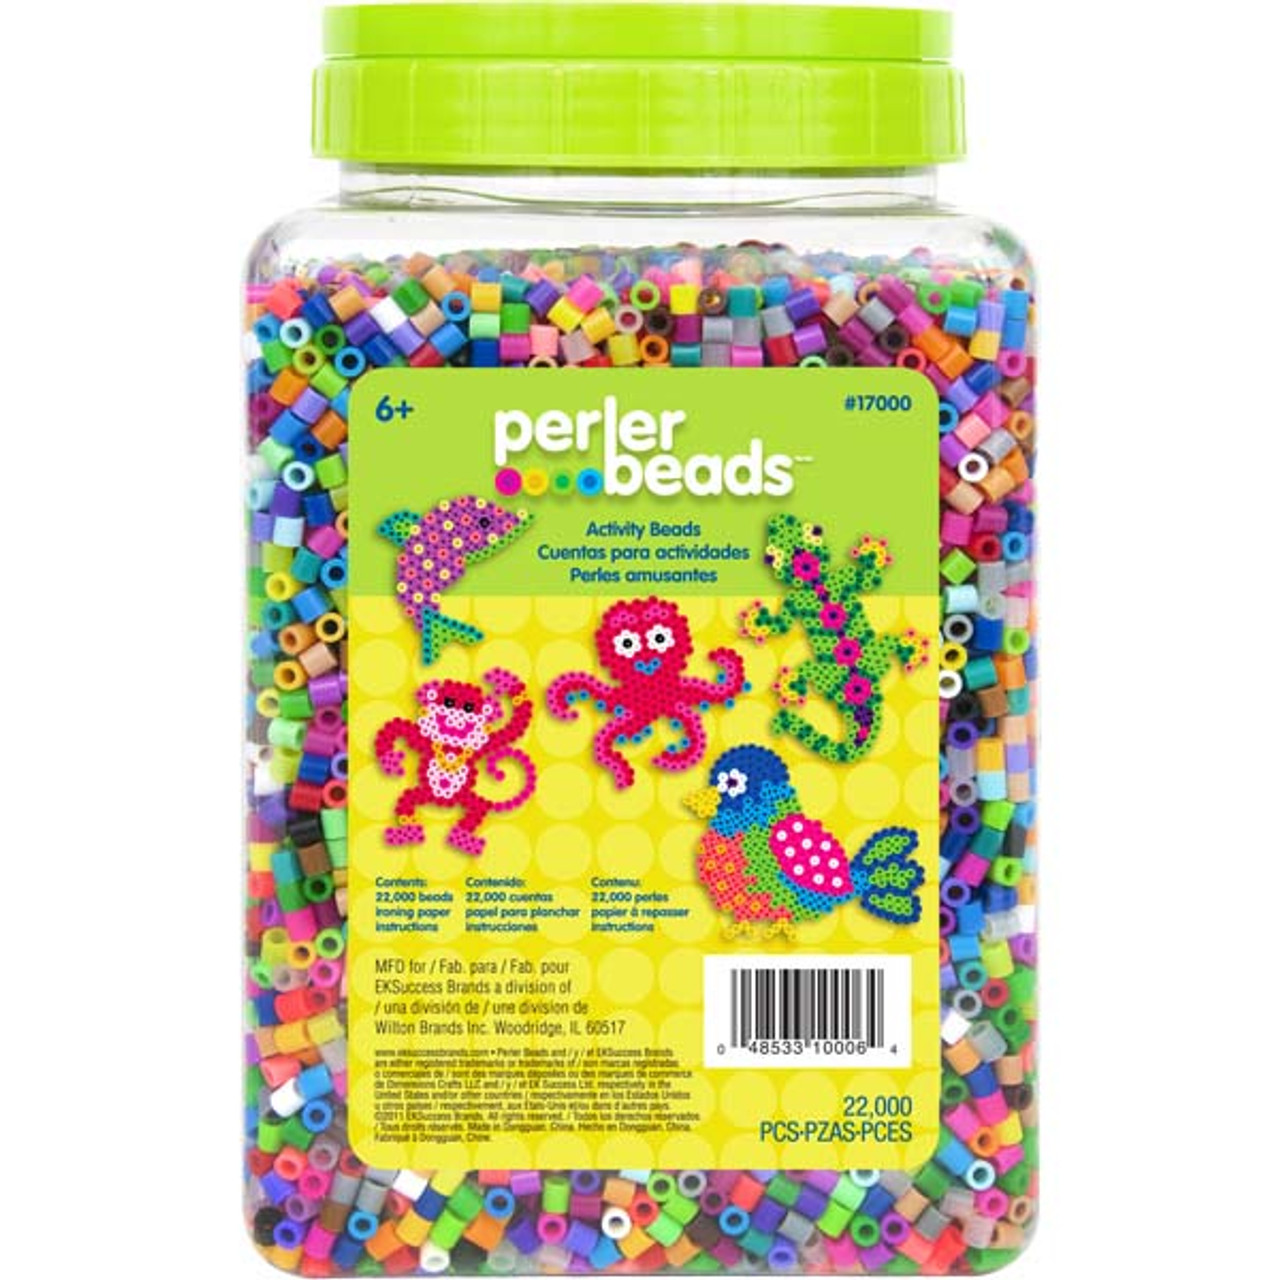 Colorations® Fluorescent Fuse Beads & 6 Pegboards in a Bucket - 22,000 Beads